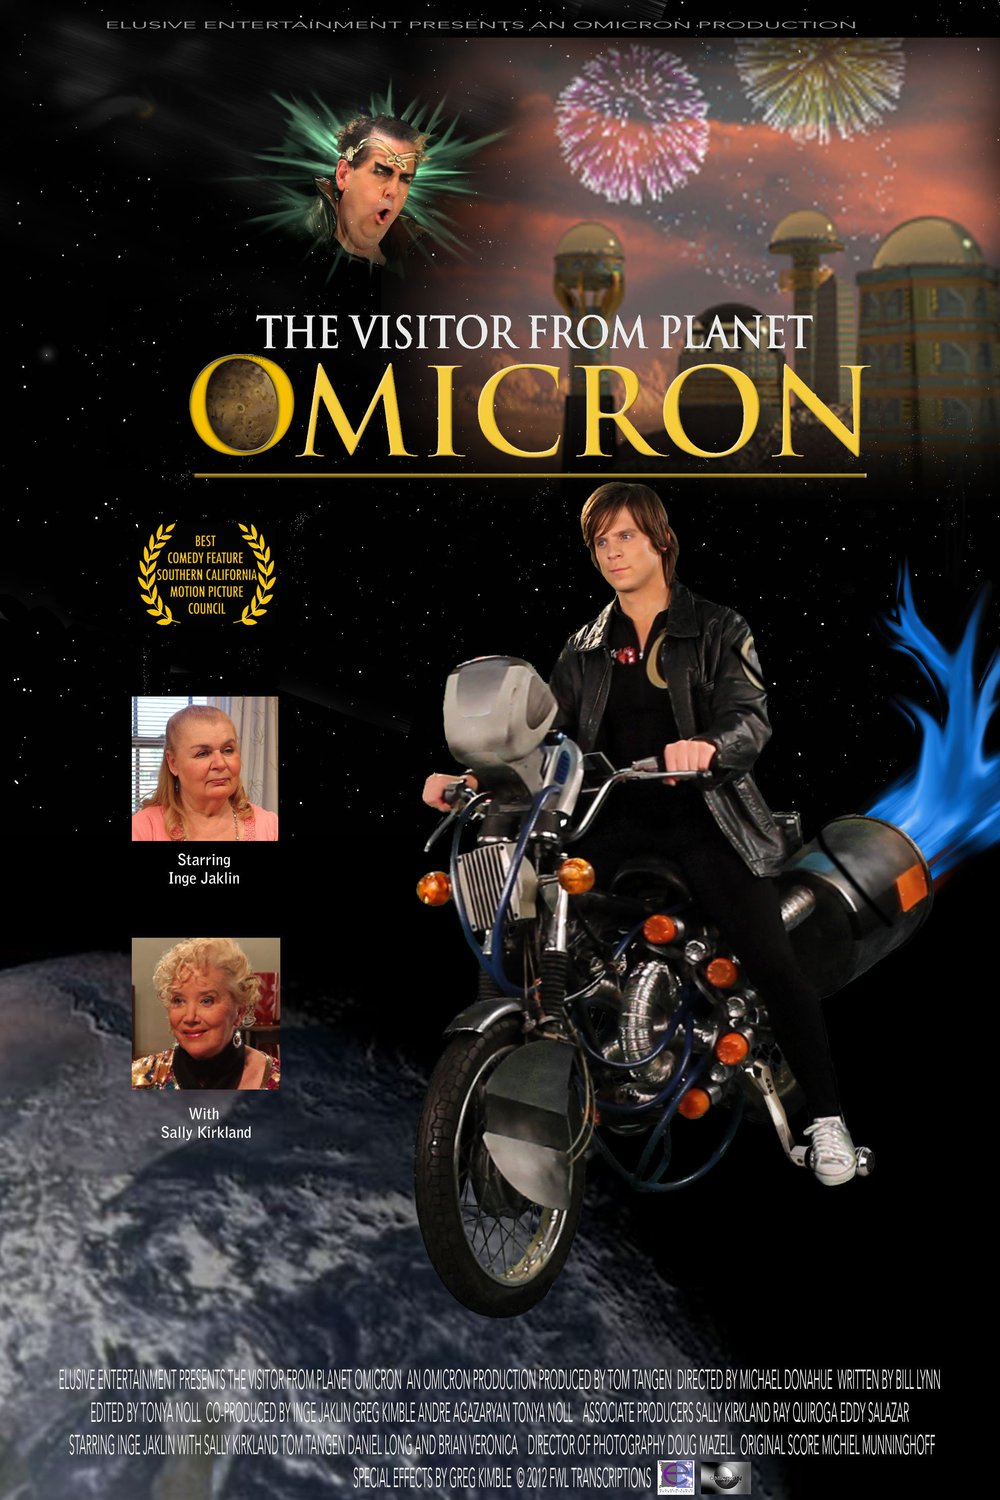 L'affiche du film The Visitor from Planet Omicron